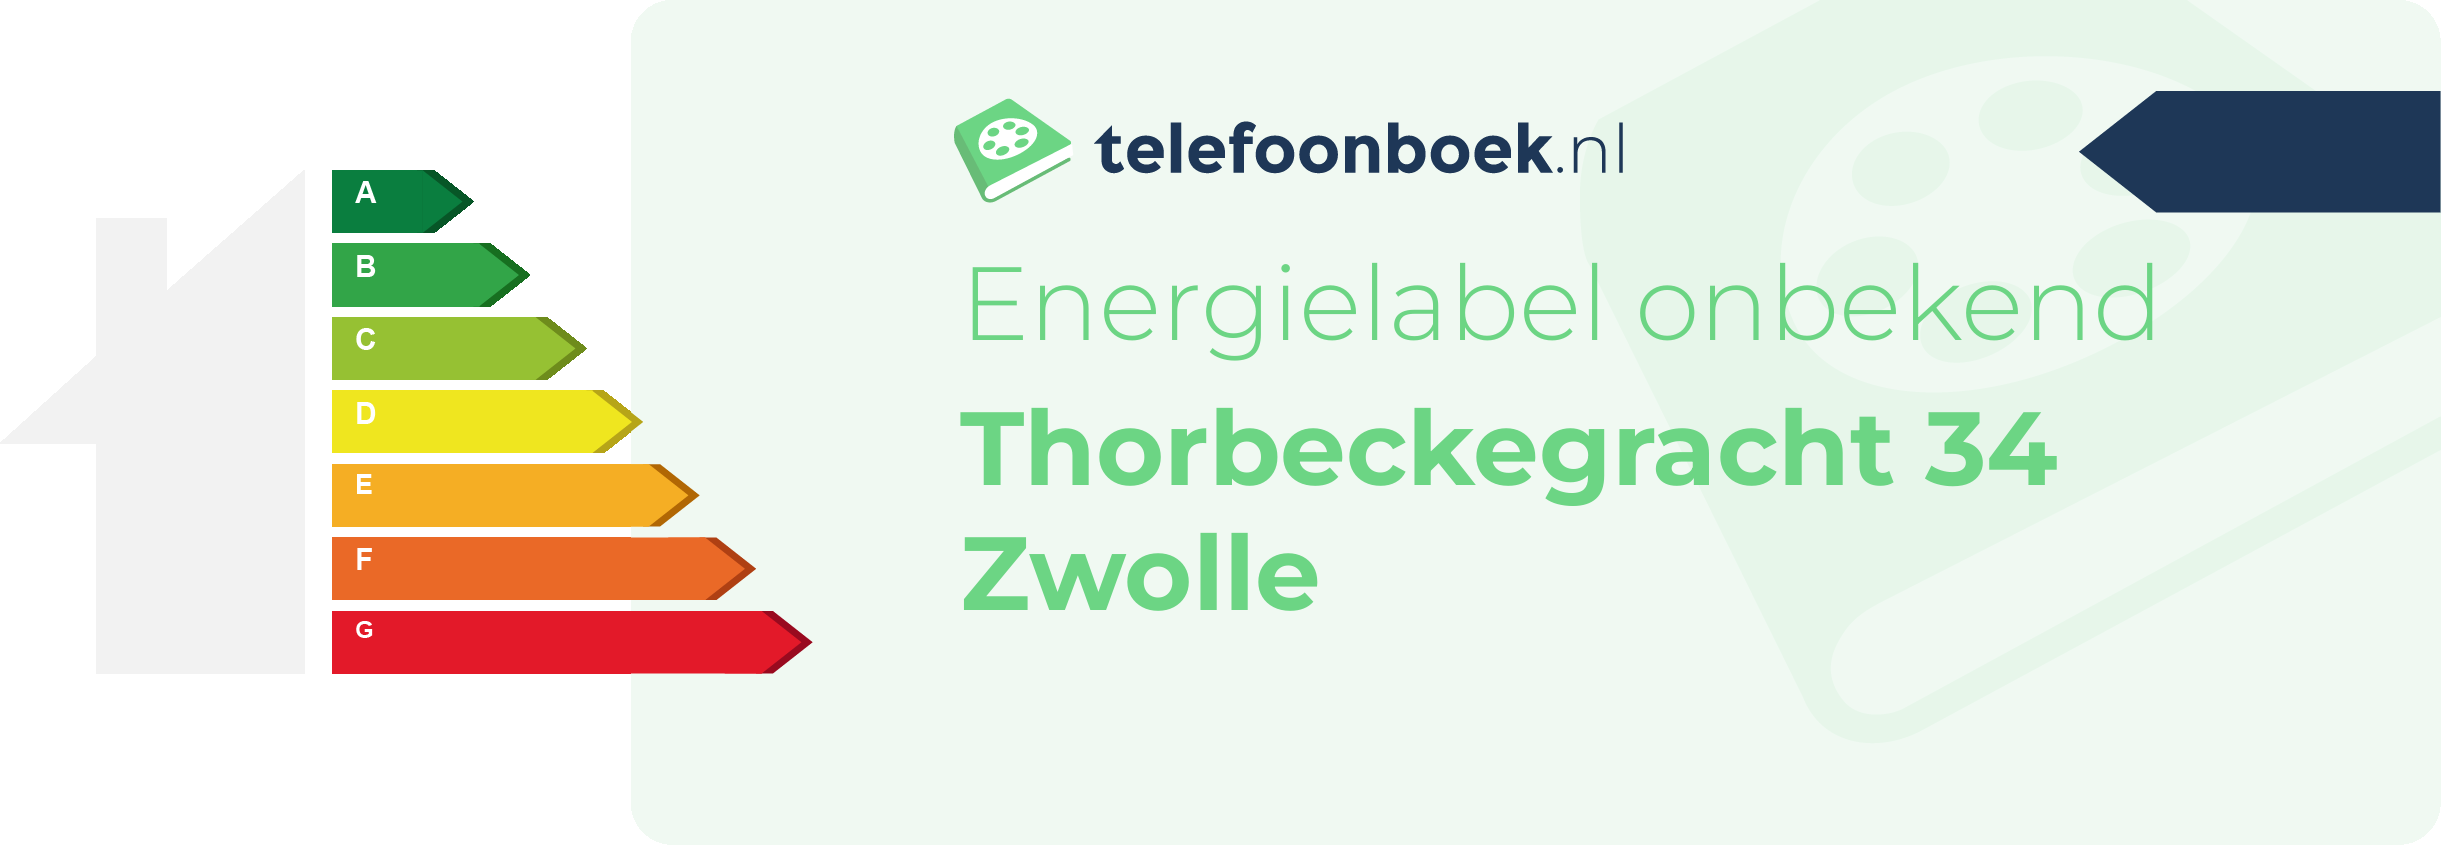 Energielabel Thorbeckegracht 34 Zwolle